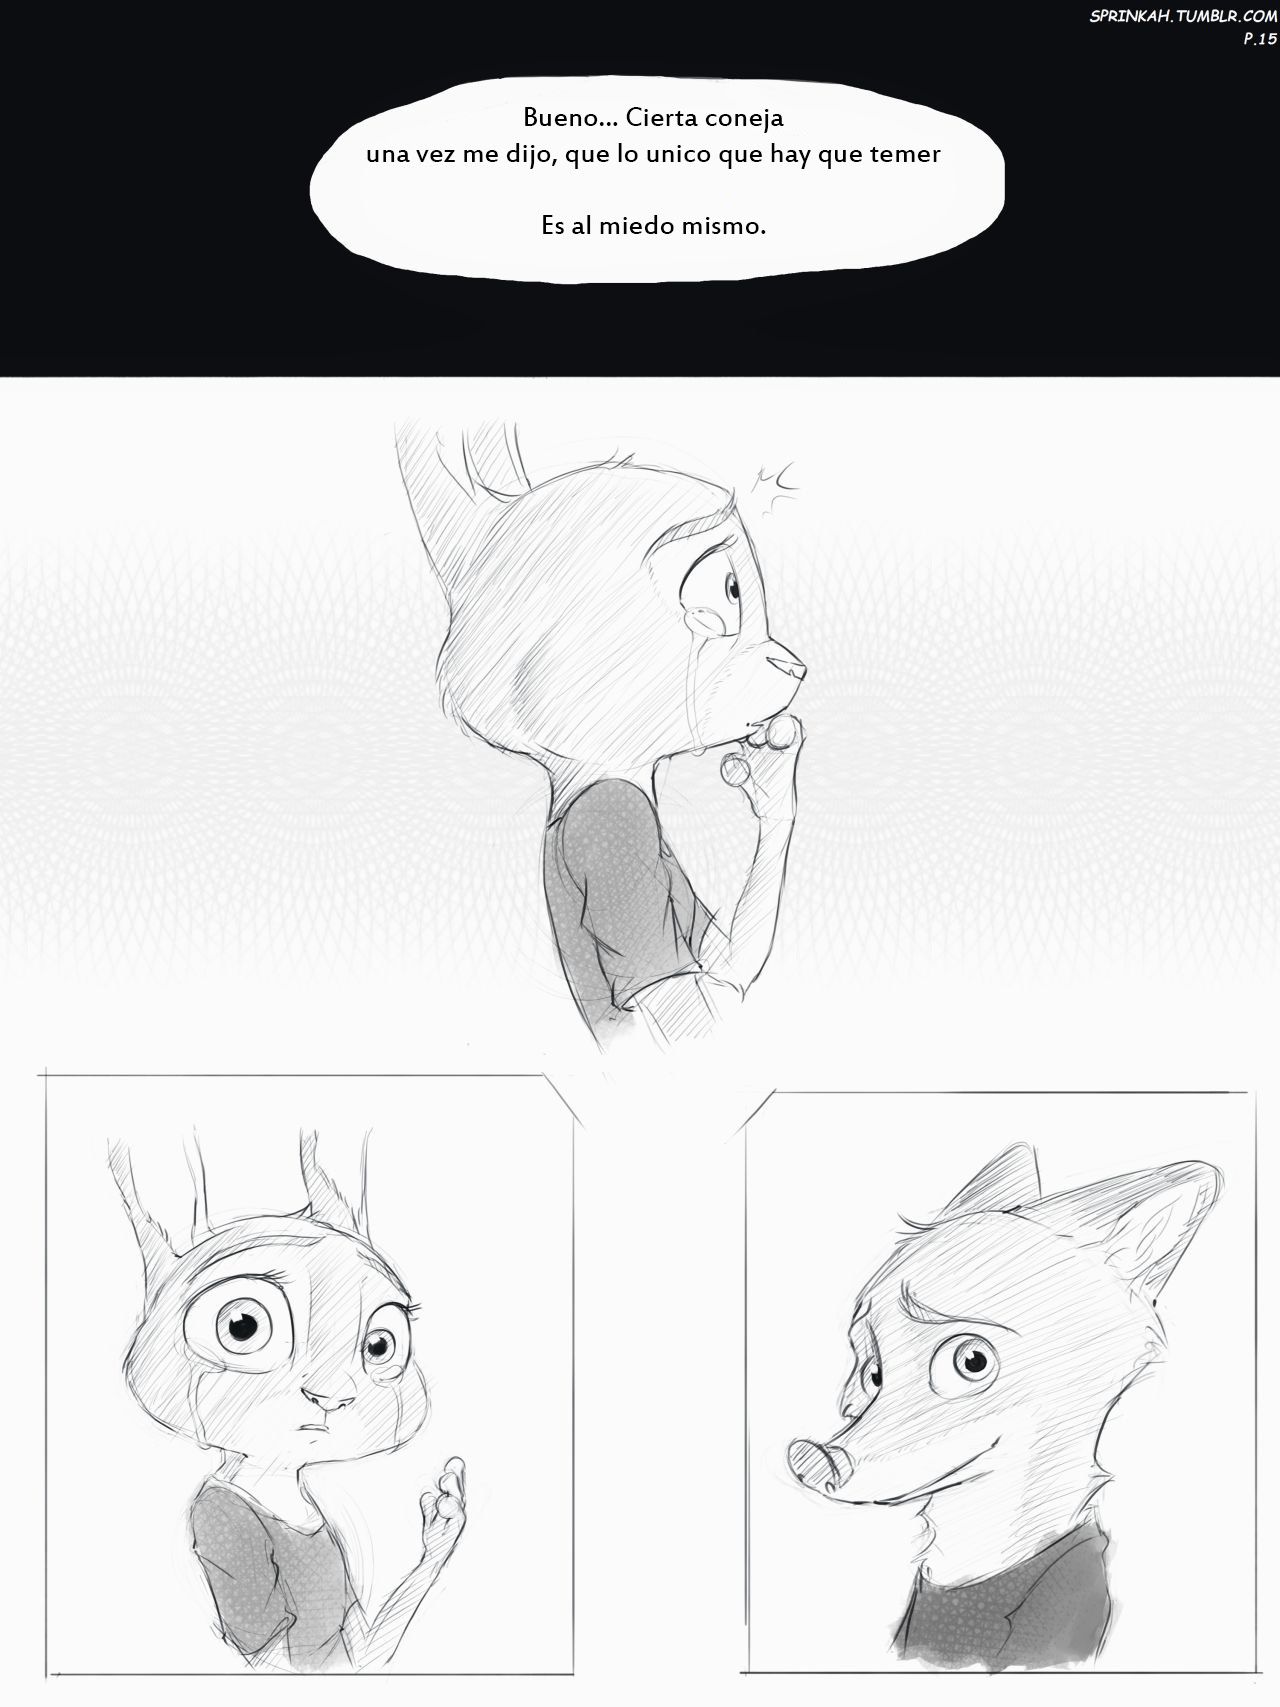 [Sprinkah] This is what true love looks like (Zootopia) (Spanish) (On Going) [Landsec] http://sprinkah.tumblr.com/ 26